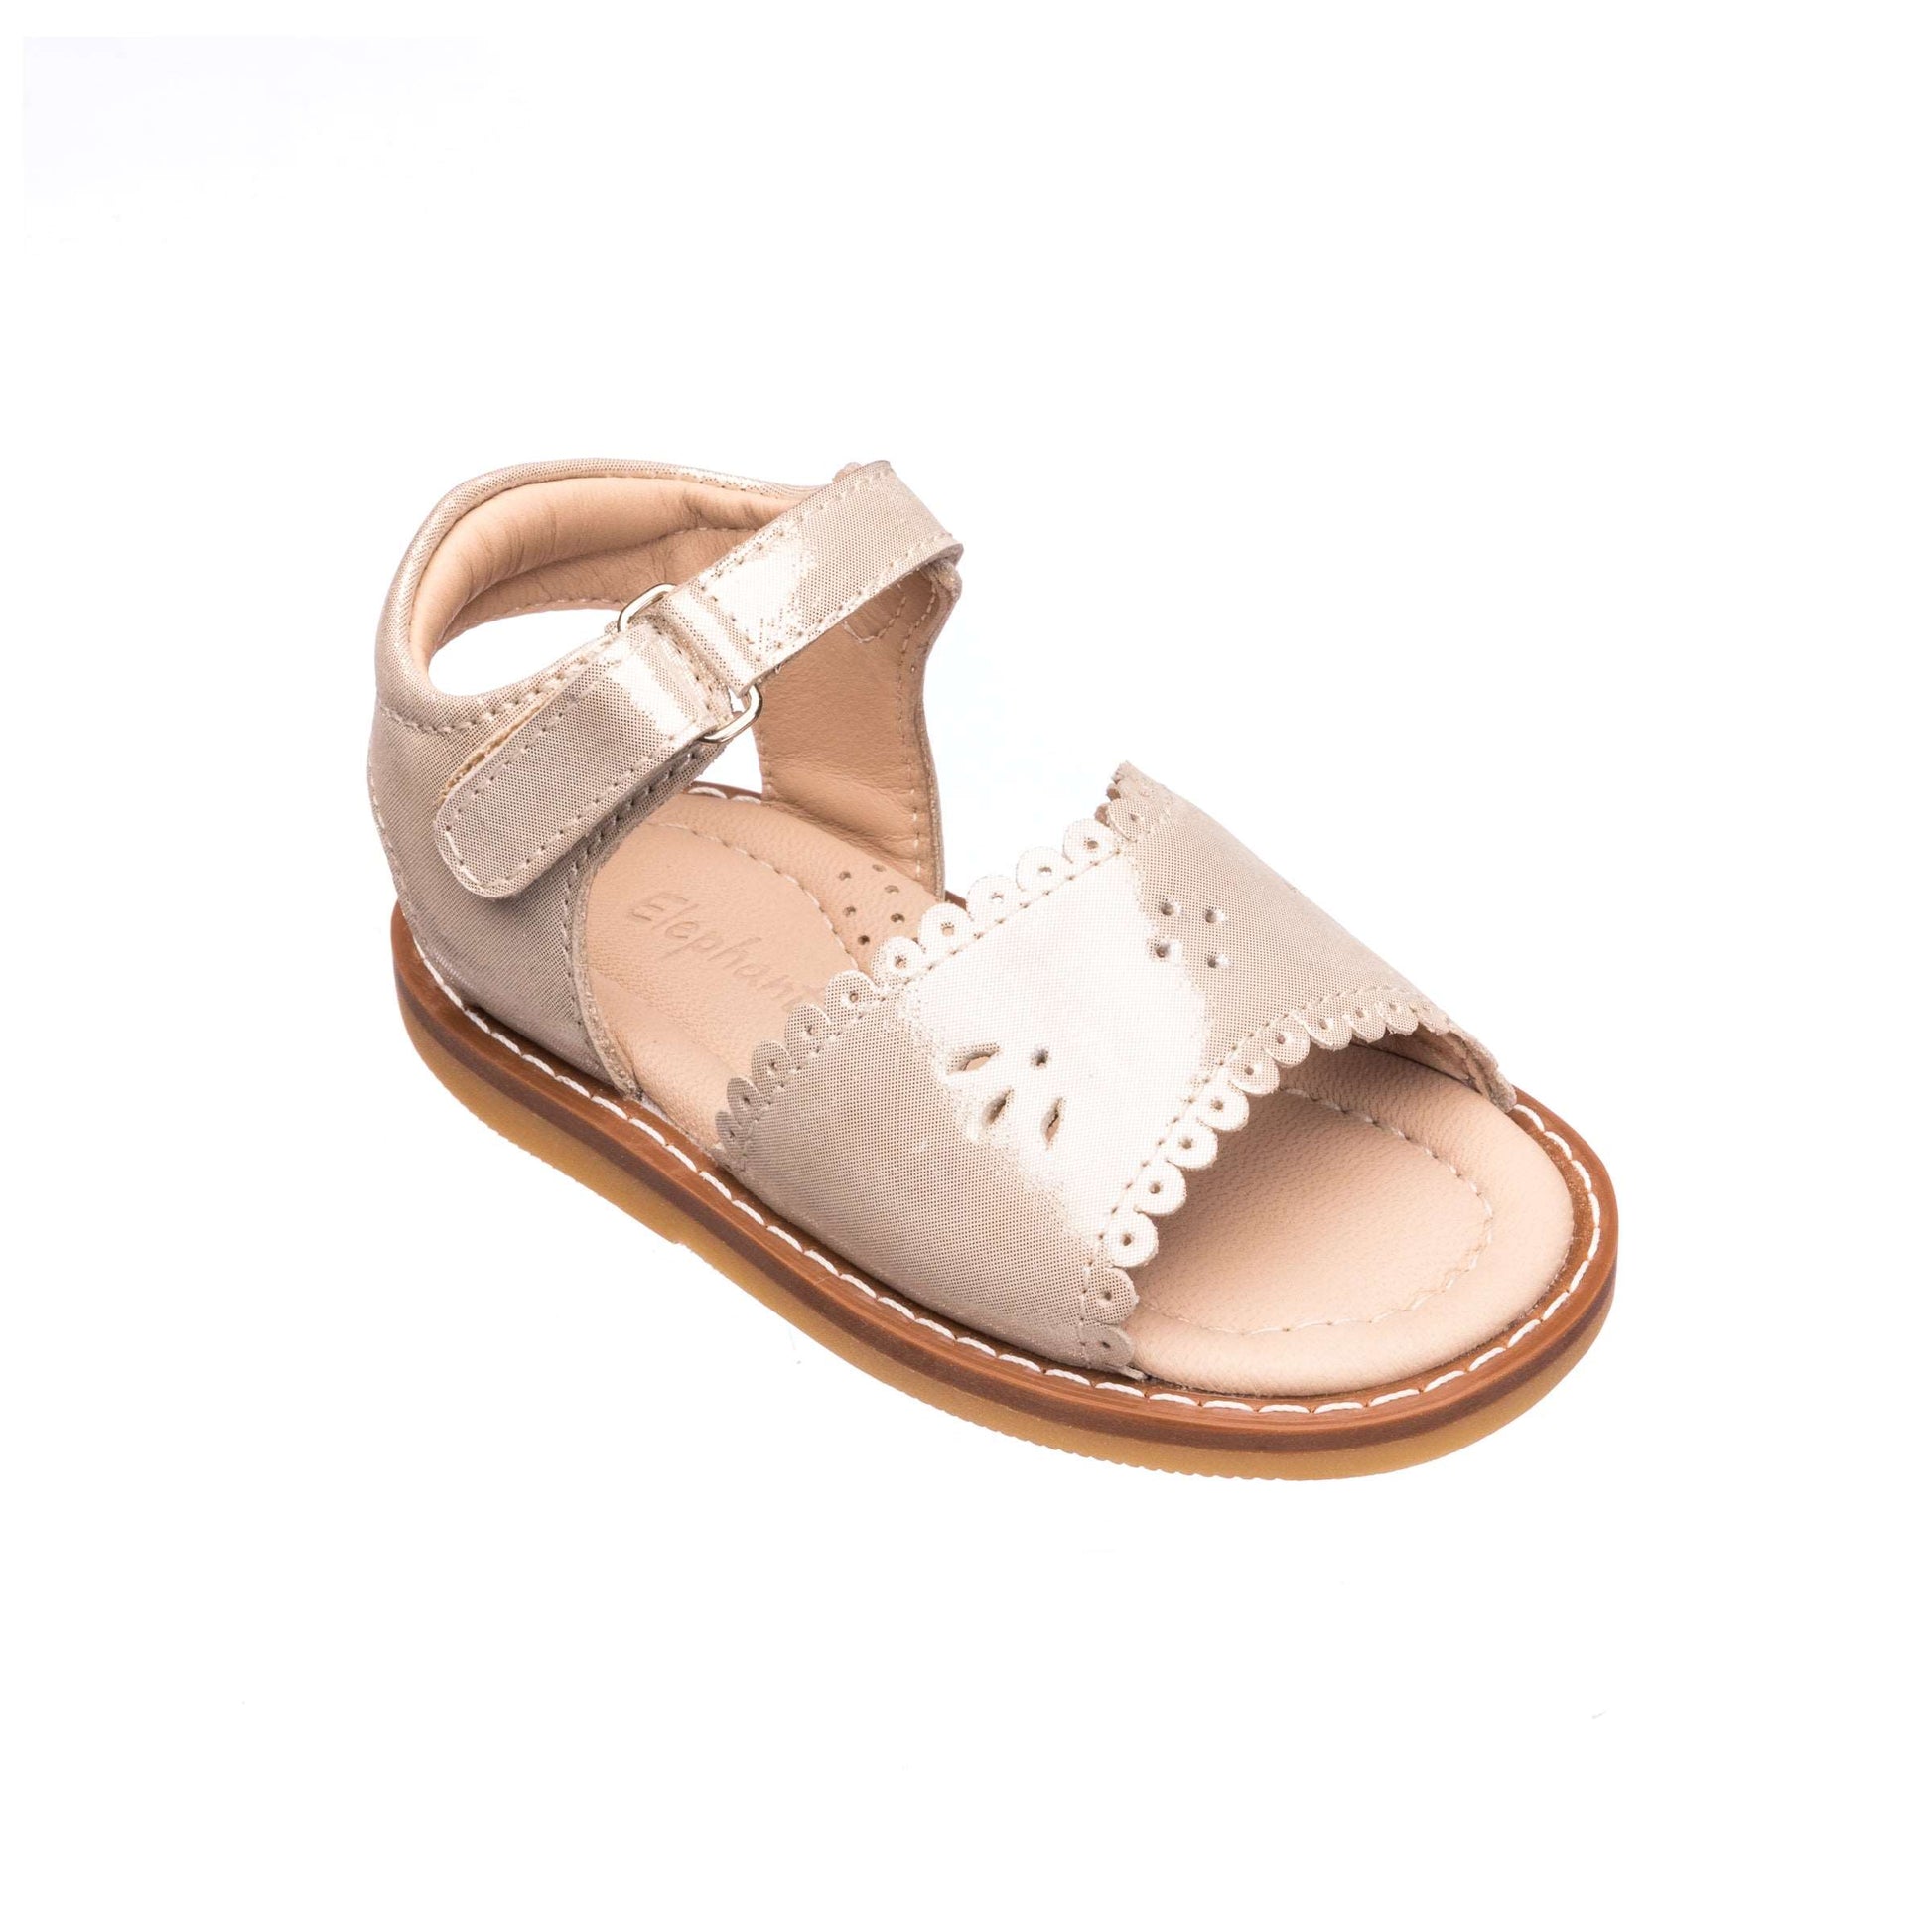 Classic Sandal with Scallop Talc